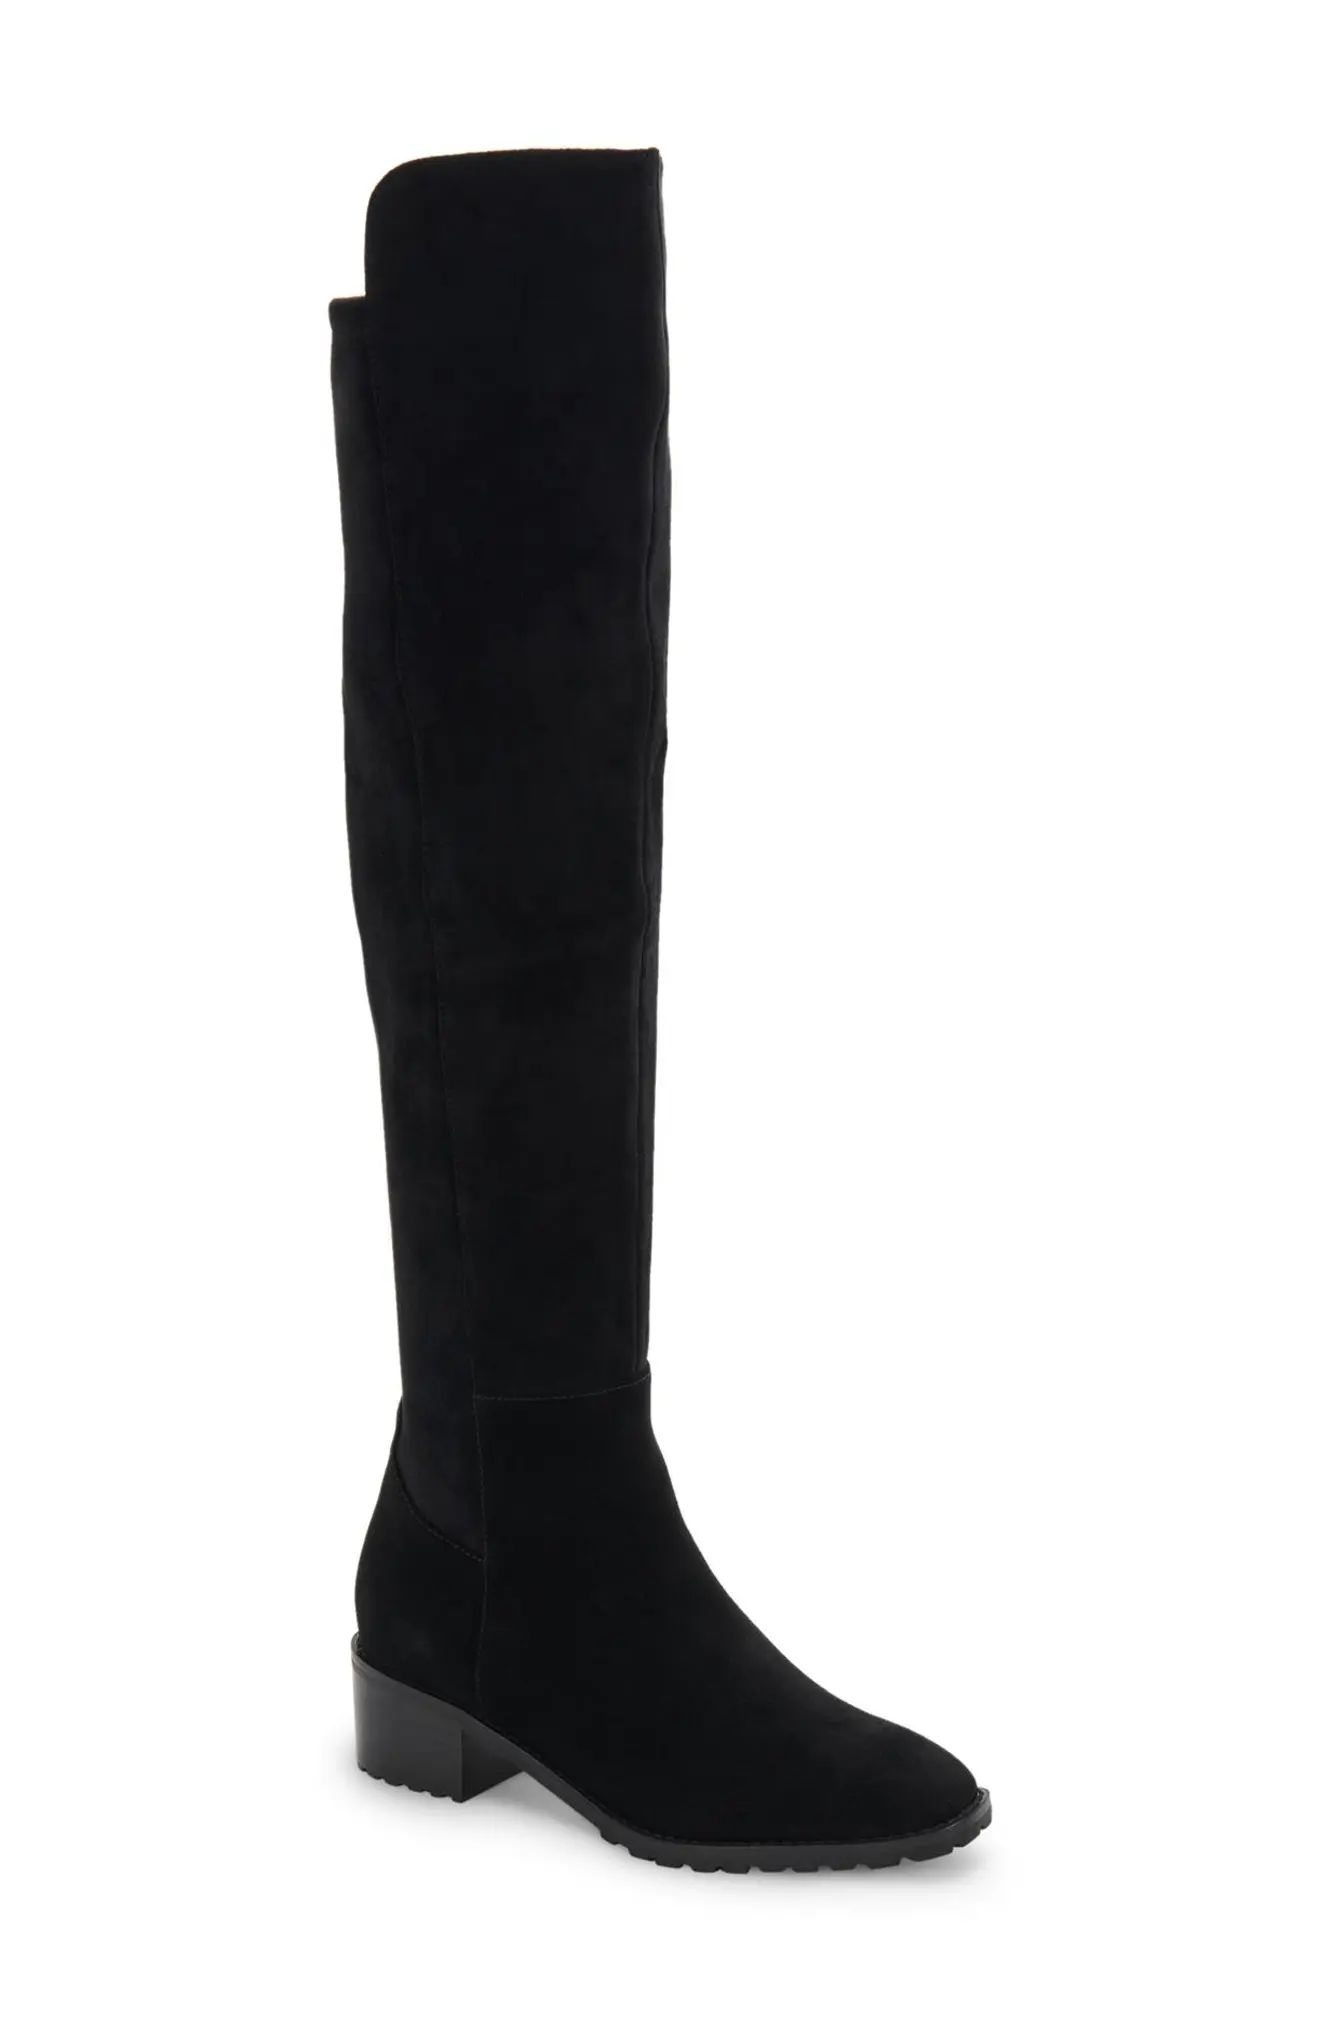 Blondo Sierra Over the Knee Boot in Black Suede at Nordstrom, Size 8.5 | Nordstrom